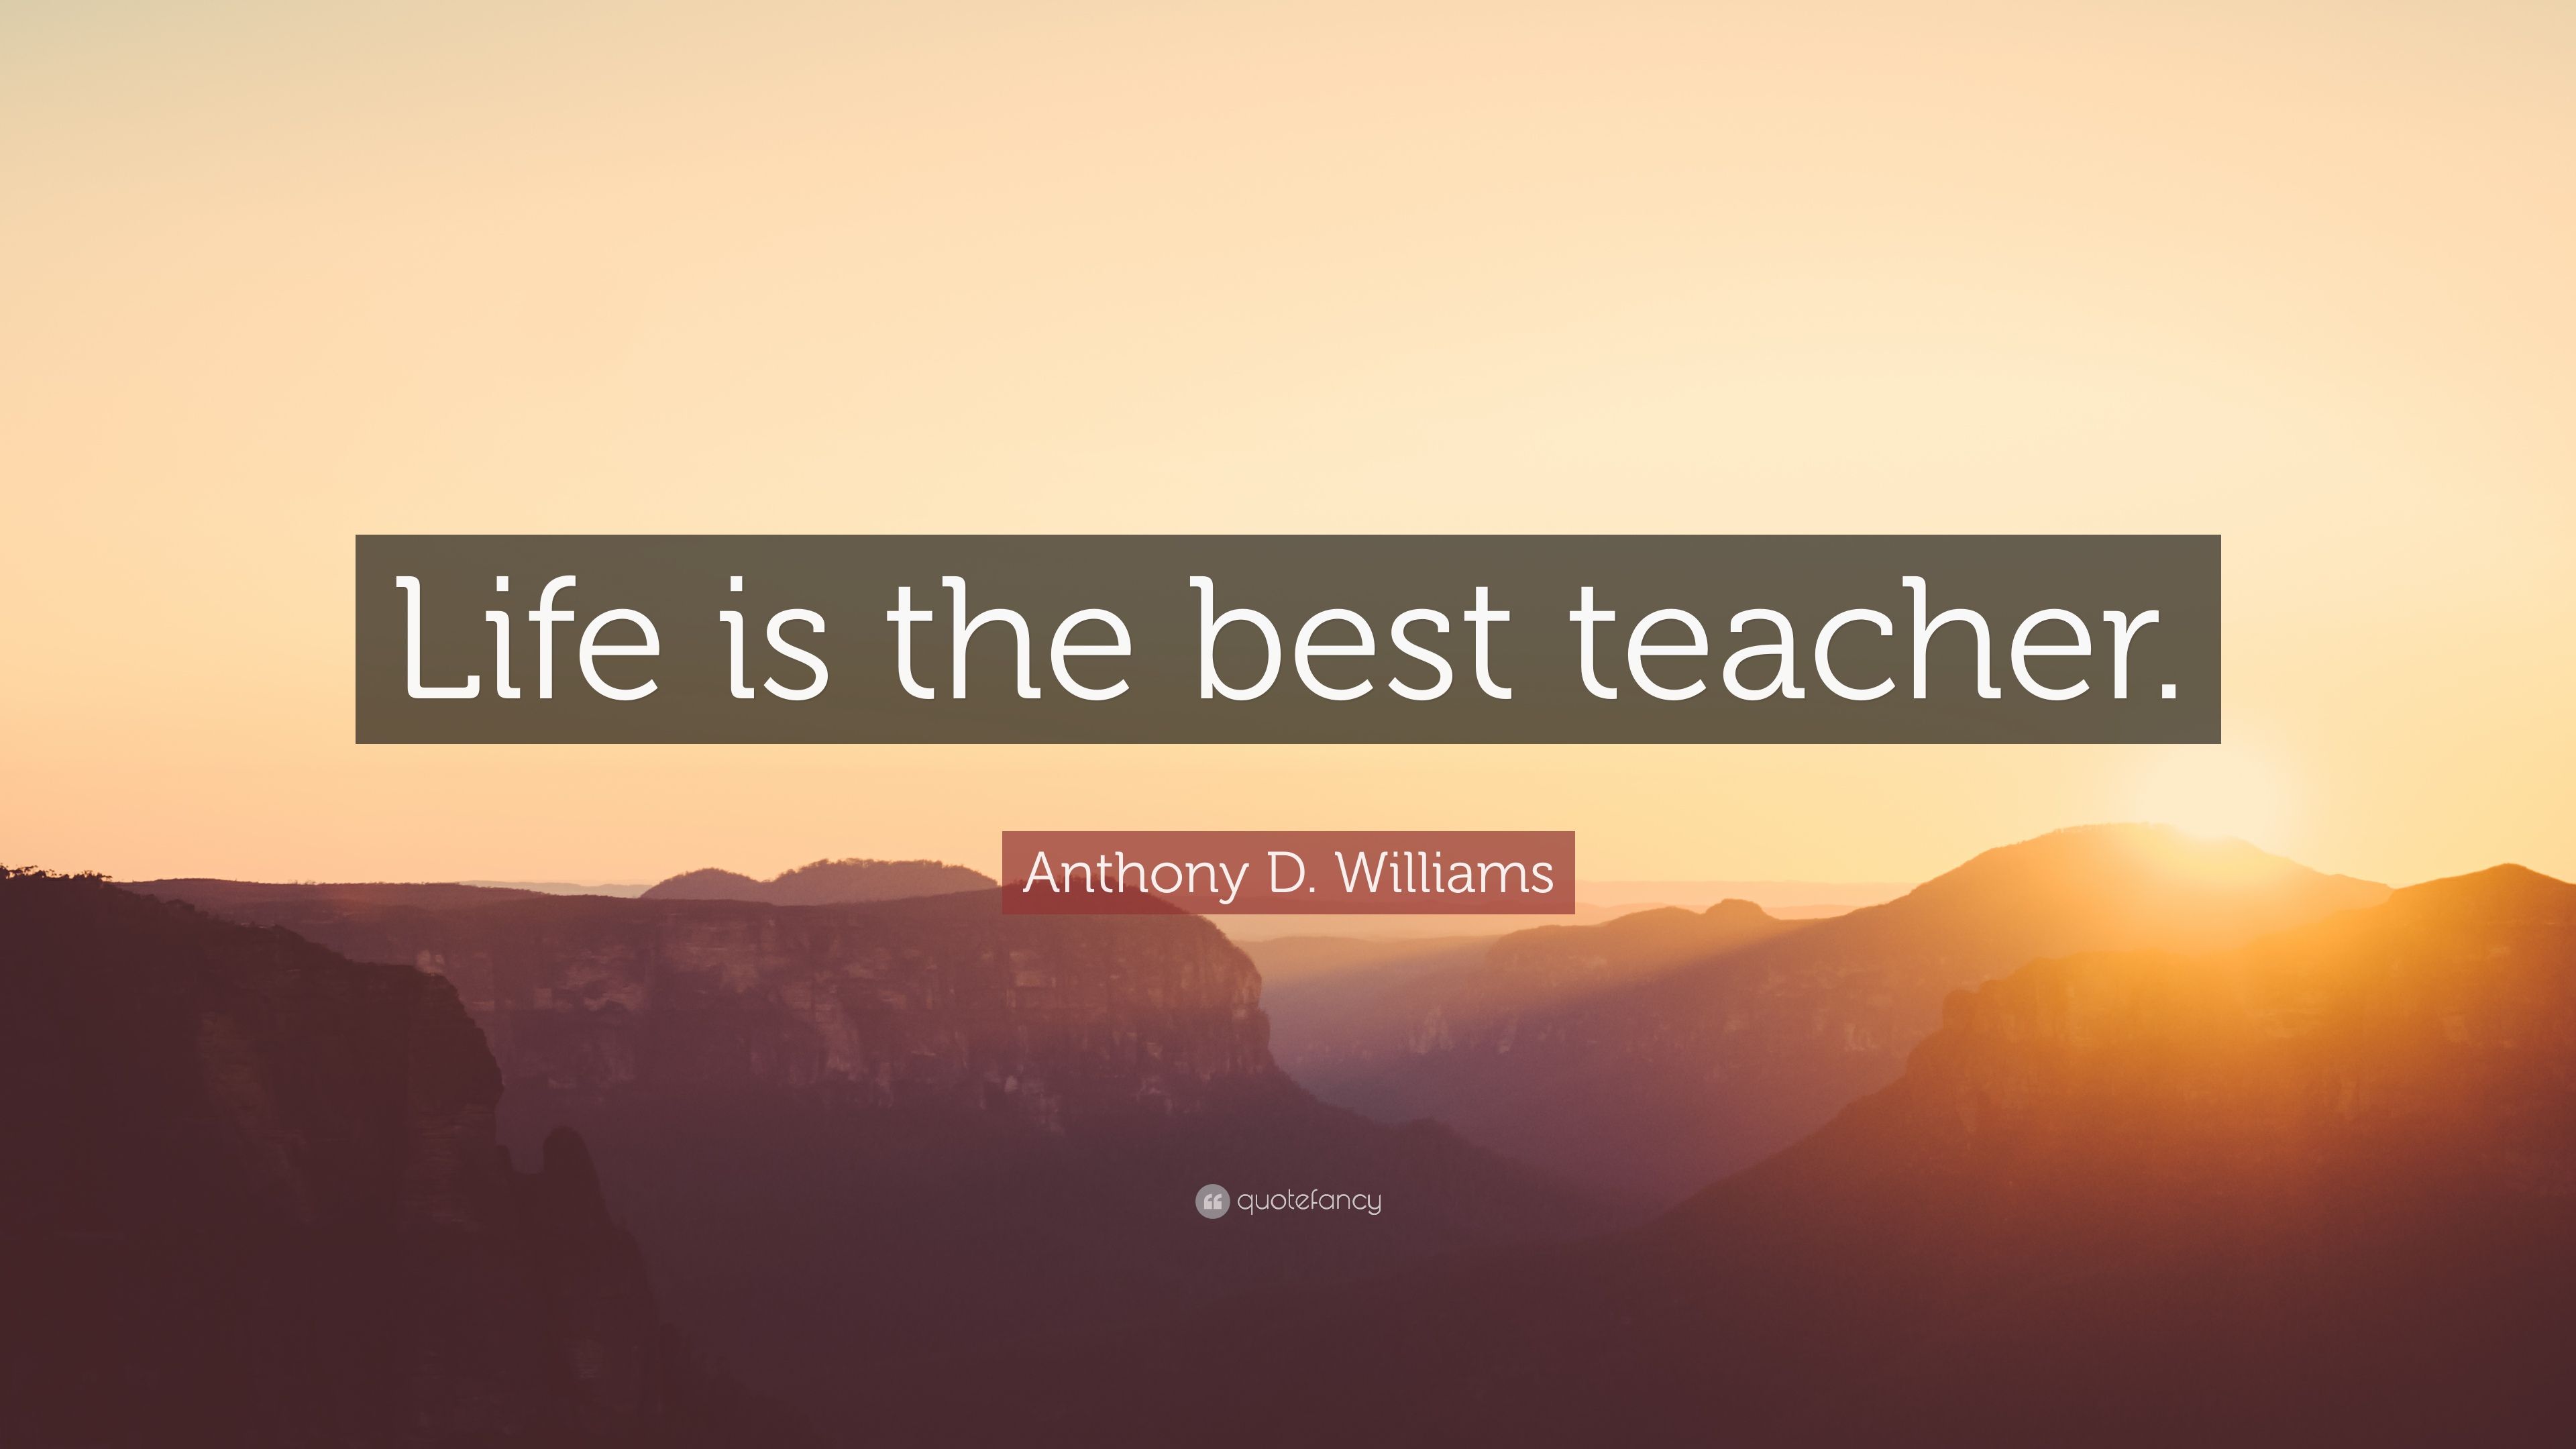 Anthony D. Williams Quote: “Life is the best teacher.” (9 wallpaper)